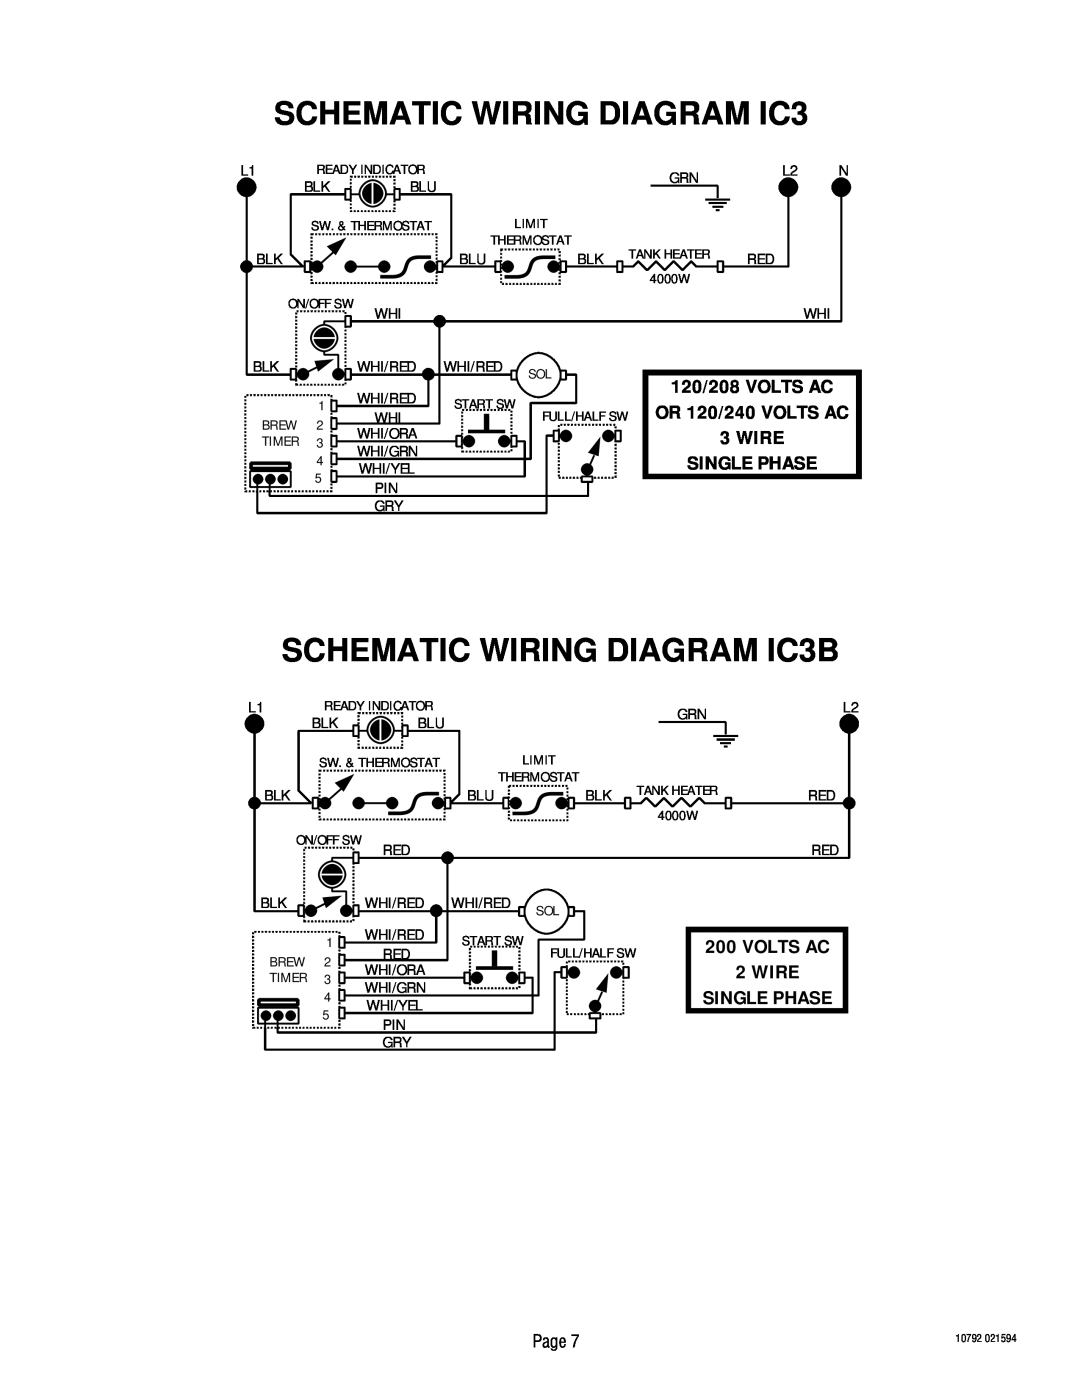 Bunn warranty SCHEMATIC WIRING DIAGRAM IC3B, 120/208 VOLTS AC OR 120/240 VOLTS AC 3WIRE, Single Phase, Page 